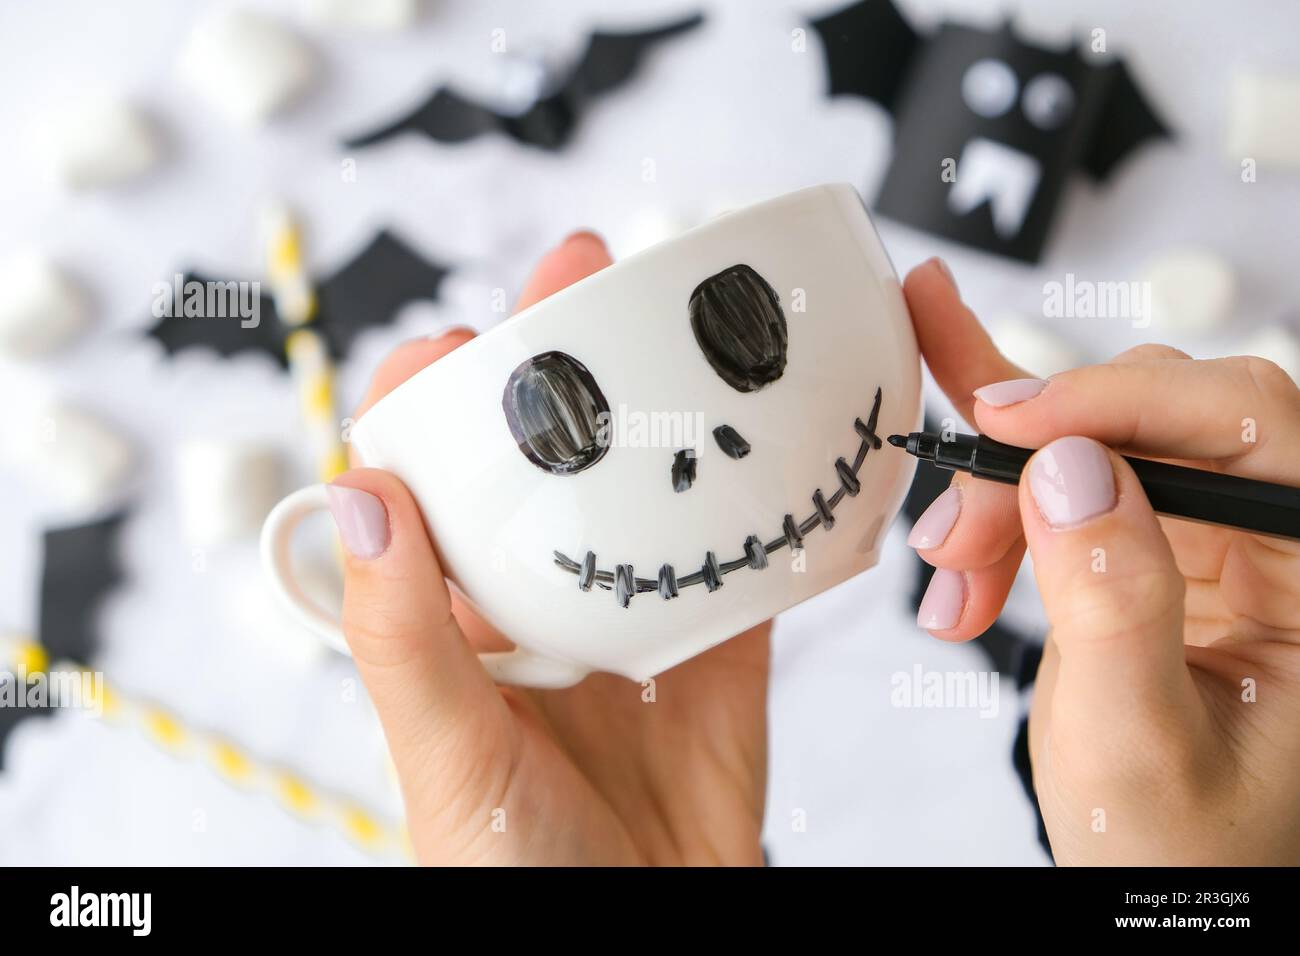 Female hands paint on white cup scary jacks face DIY for kids Halloween home activities Holiday art children craft Handmade deco Stock Photo